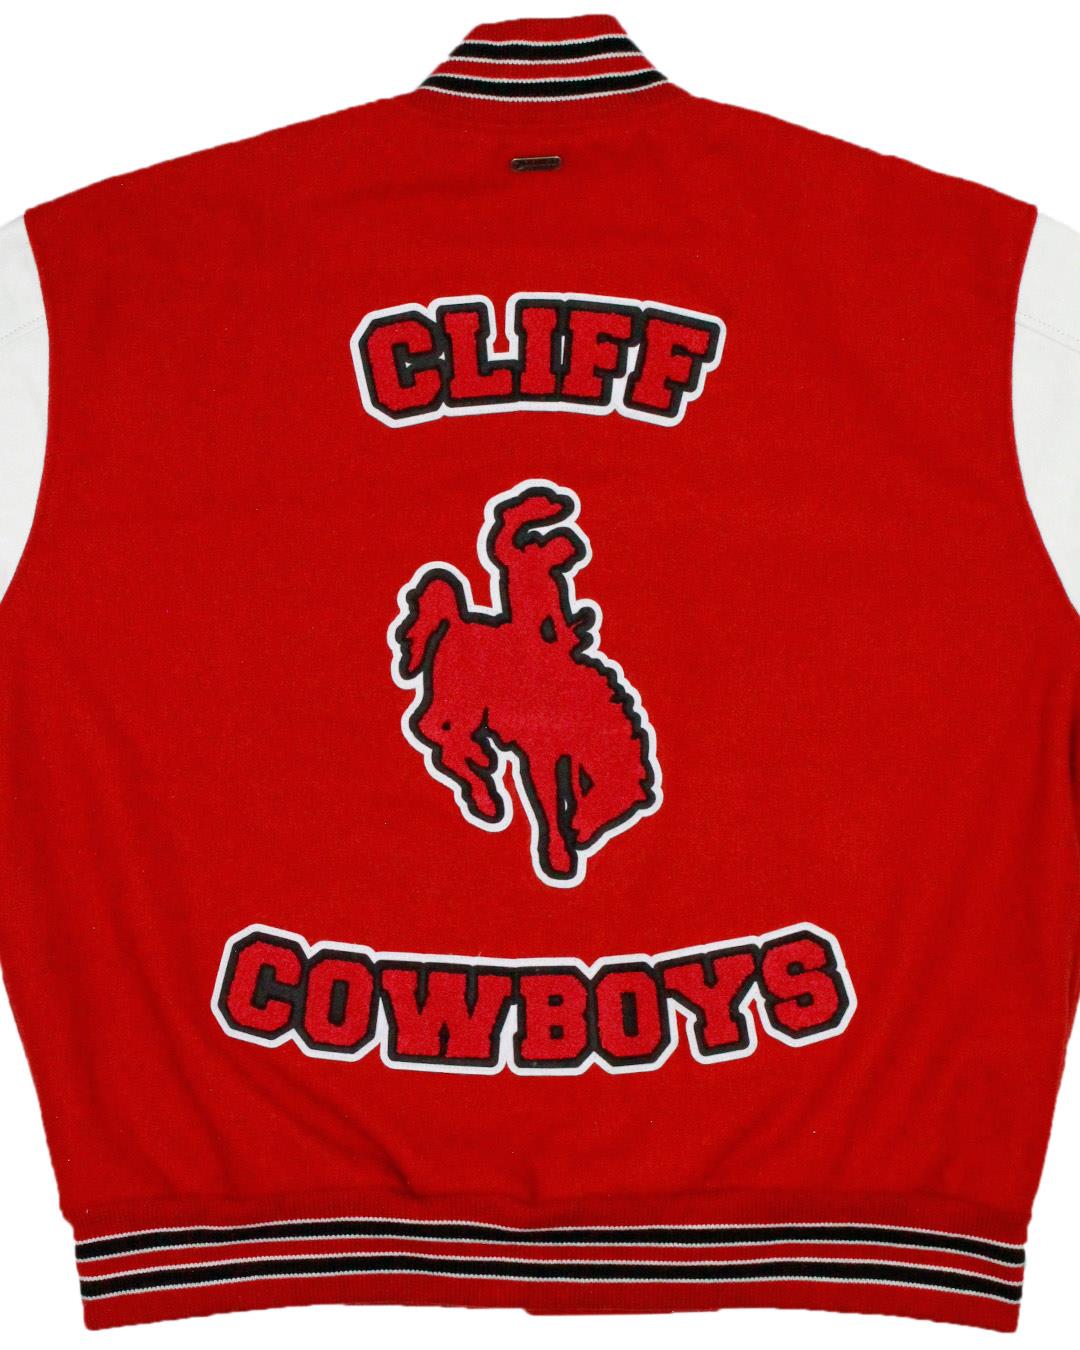 Cliff High School Cowboys/Cowgirls Letter Jacket, Cliff, NM - Back